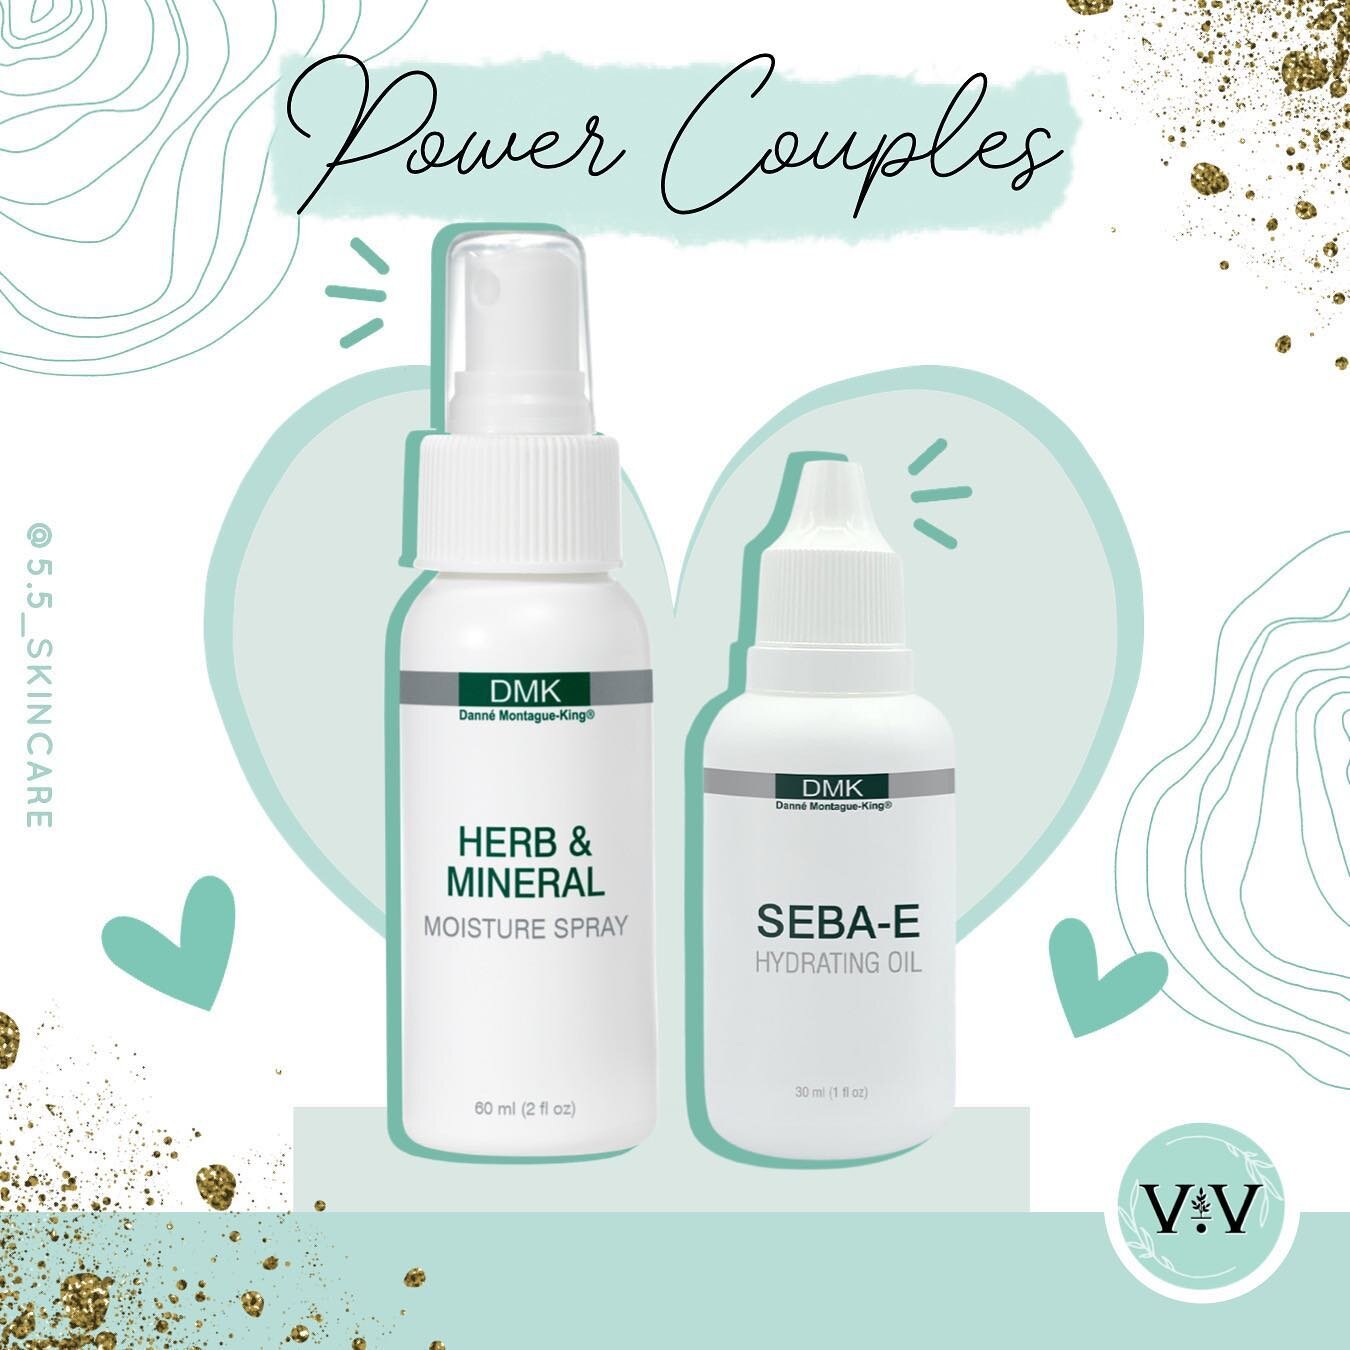 A MATCH MADE IN SKINCARE HEAVEN 👯💕

From morning light until after dark, your skin needs support and protection. DMK's Seba-E and Herb &amp; Mineral Spray provide both! 🌓

By mimicking the skin's natural secretions, this power duo replicates, repa